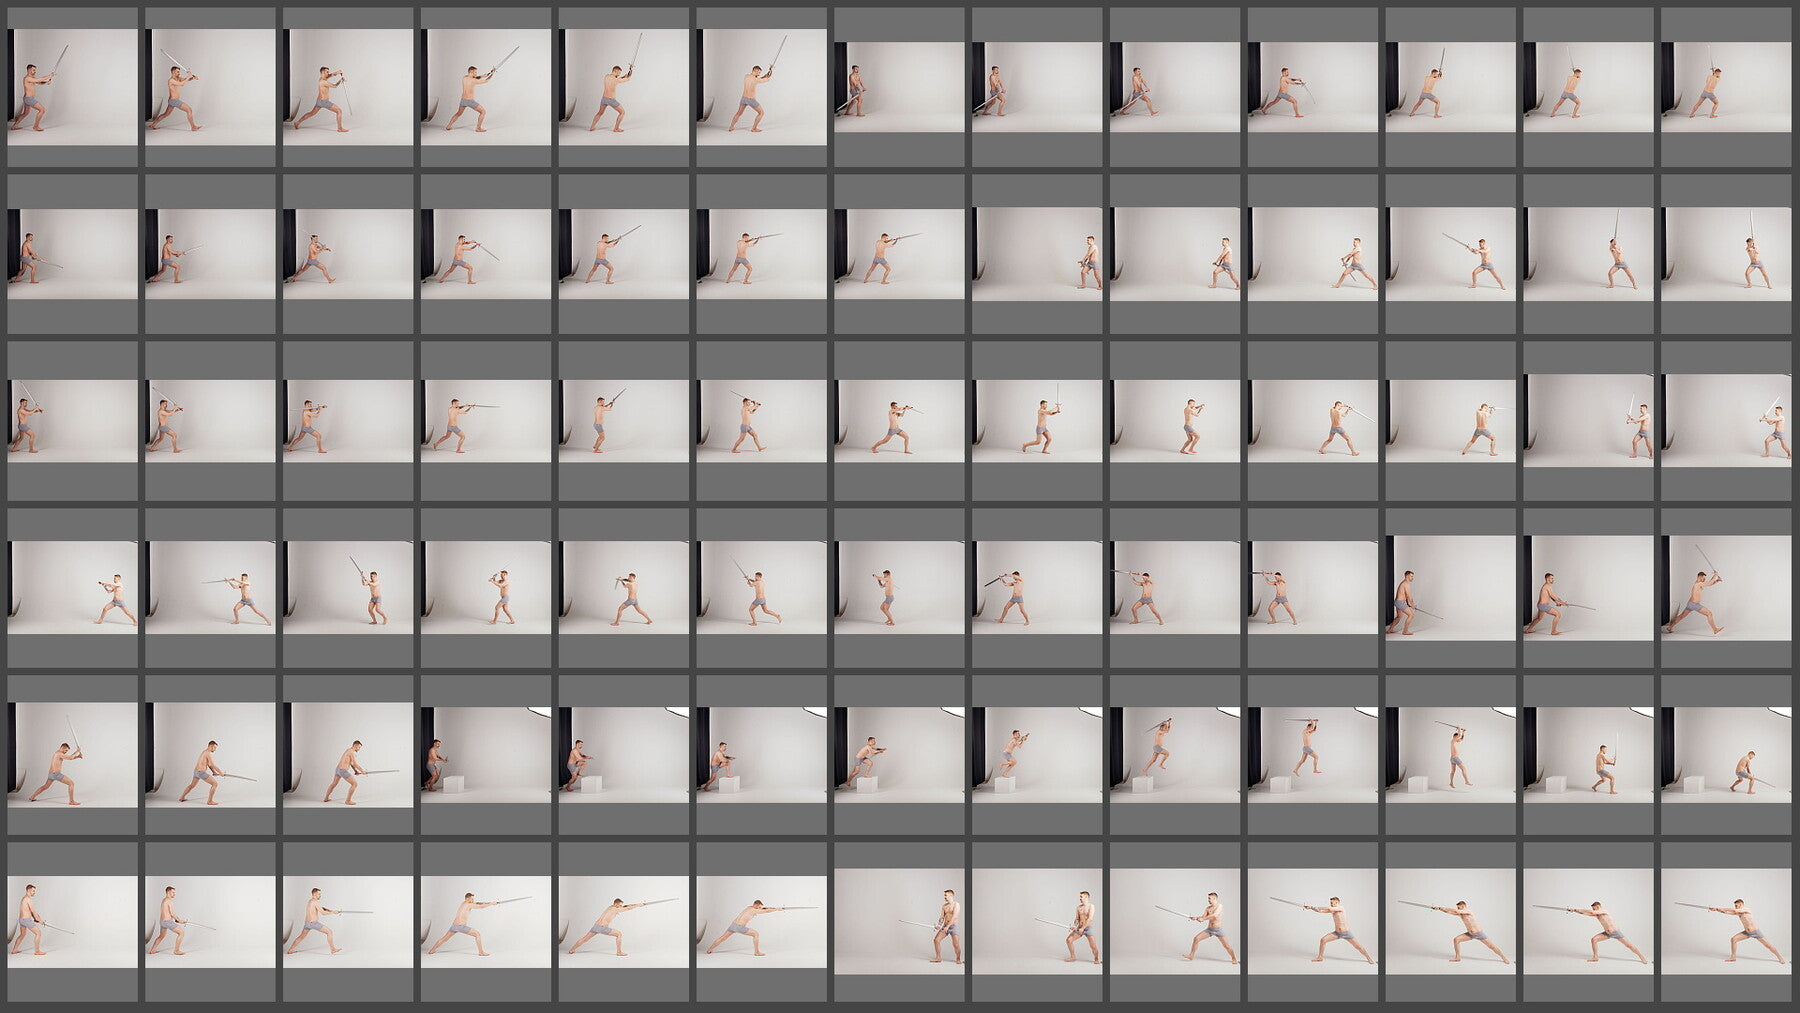 600+ Reference Photos - Sword Fighting (Sequential Movement)